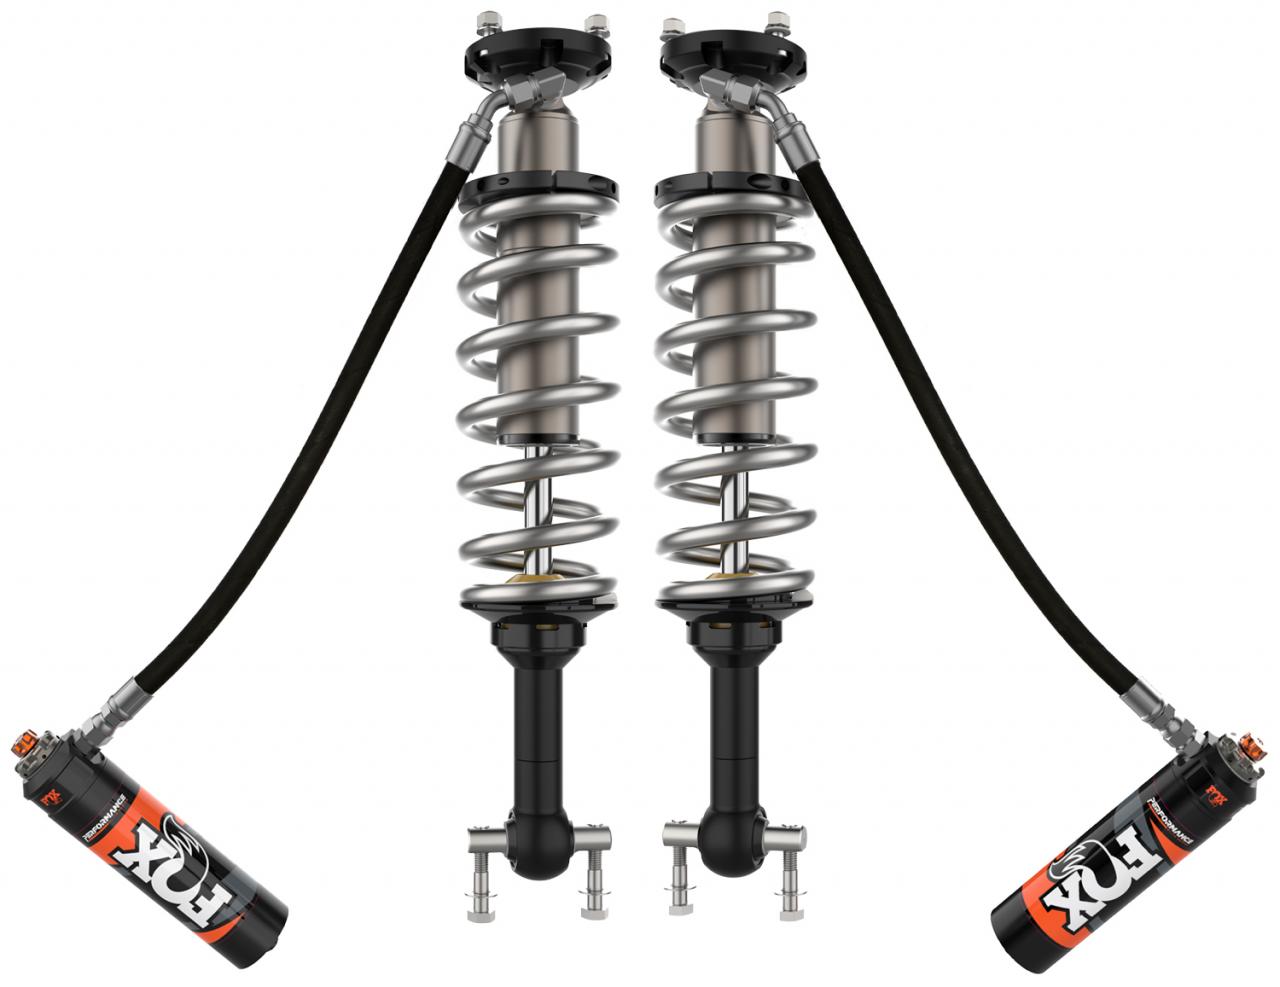 Fox 2.5 Perf Elite Adjustable Coilover Res Front 883-06-157